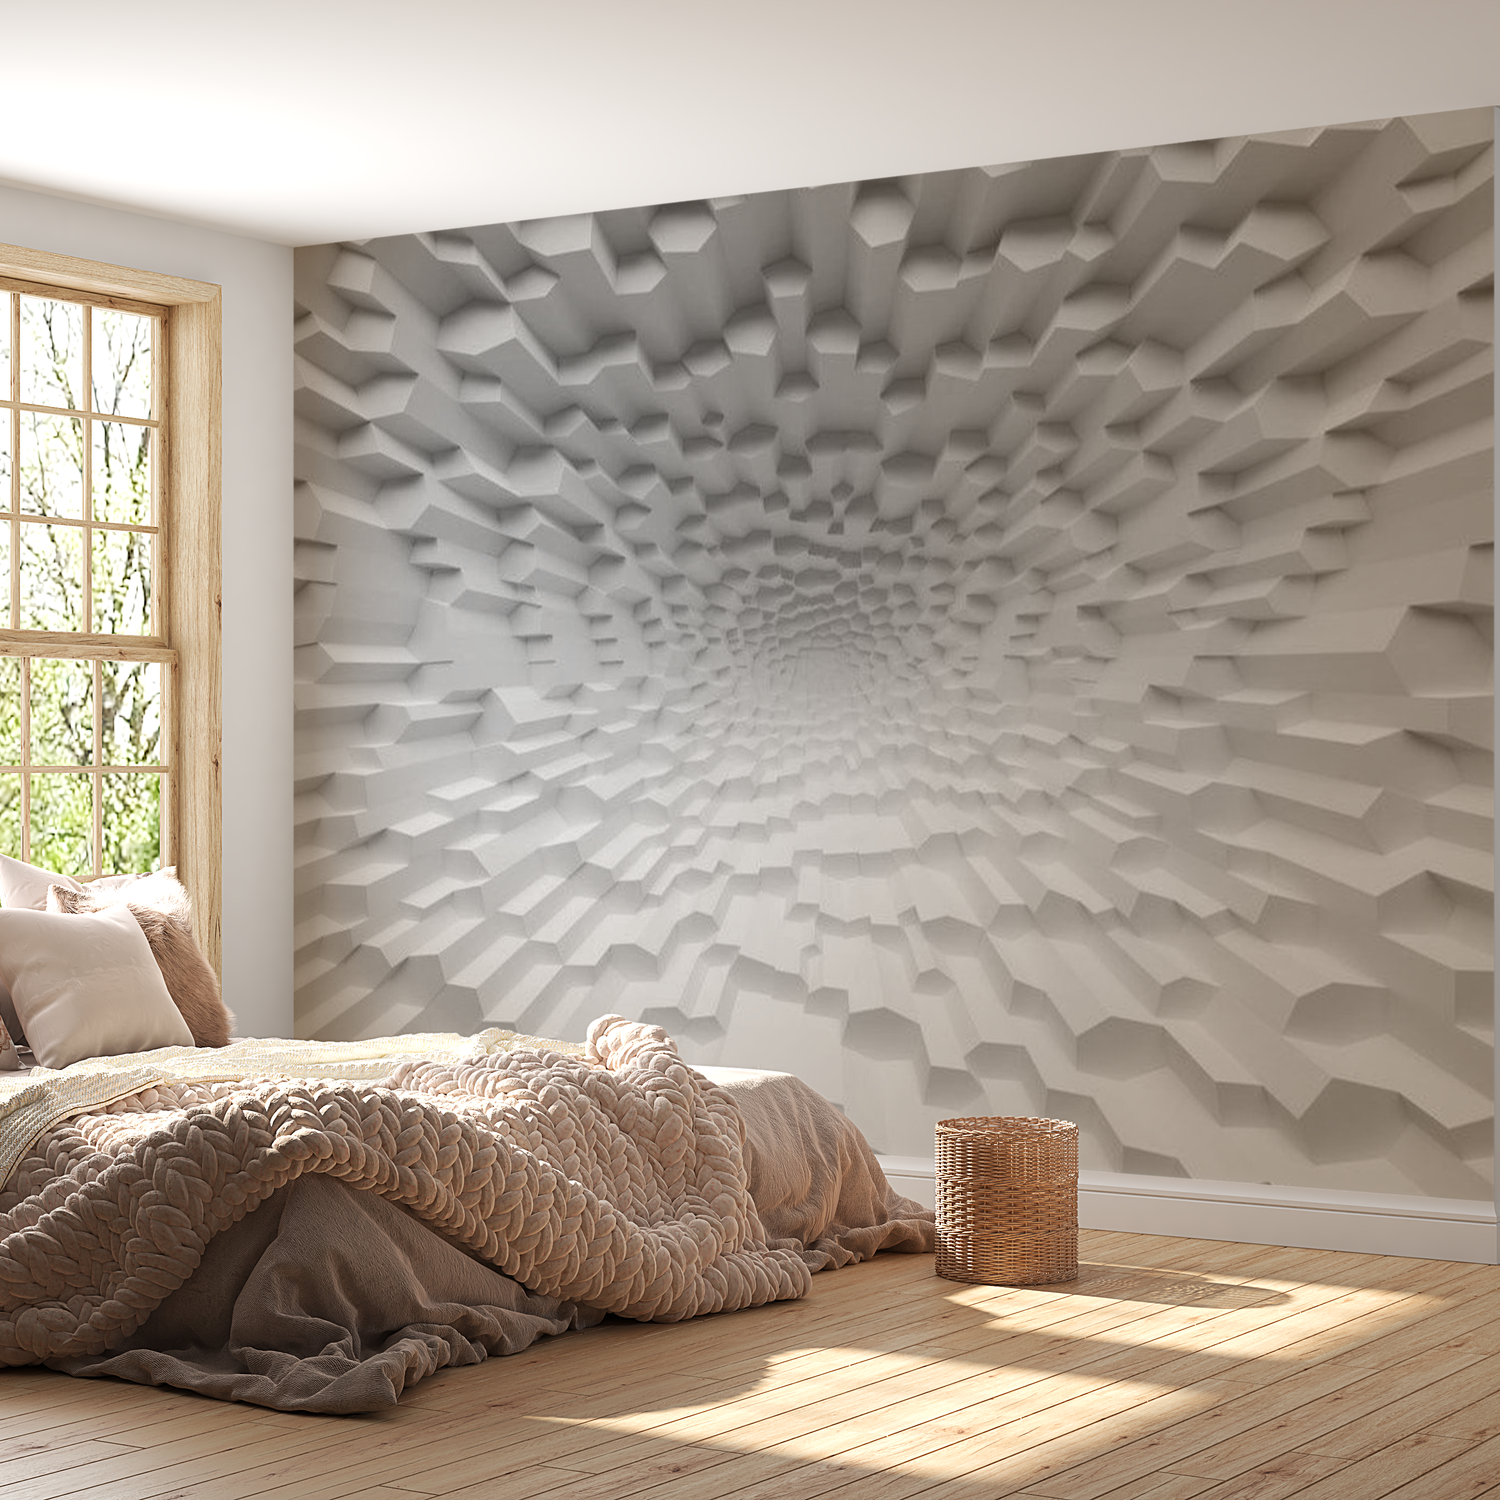 3D Illusion Wallpaper Wall Mural - The Abyss Of Oblivion 39"Wx27"H